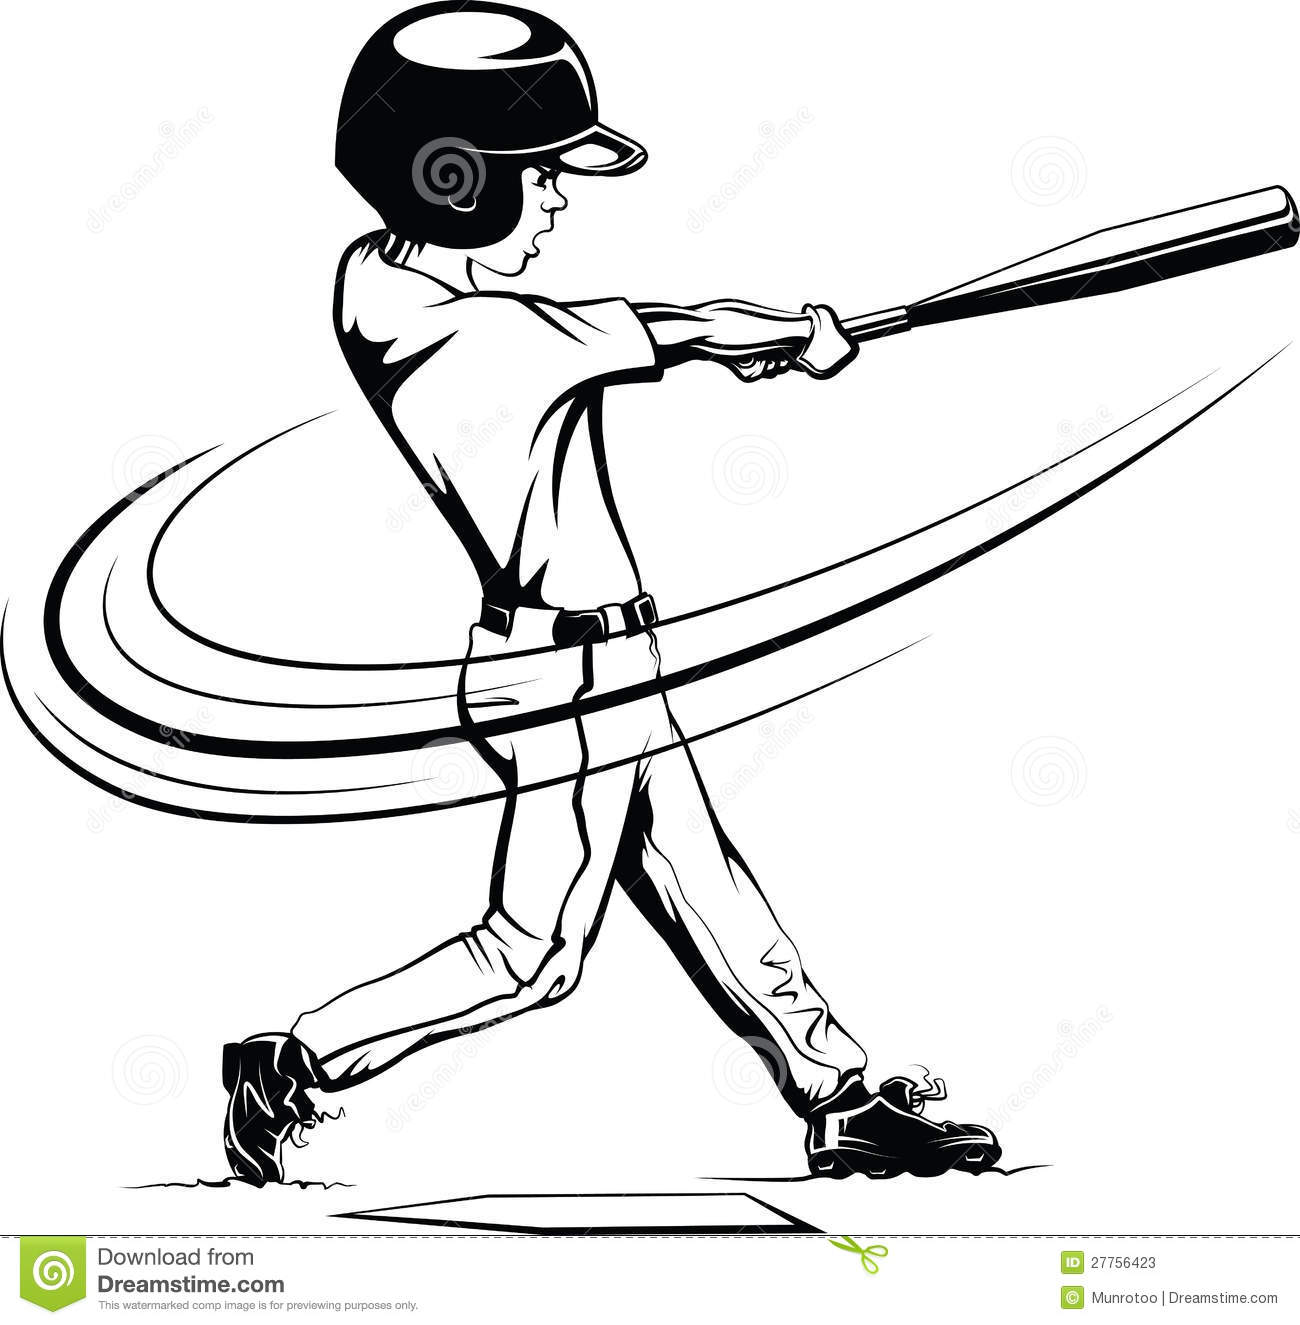 Black And White Vector Illustration Of A Young Boy Hitting A Home Run